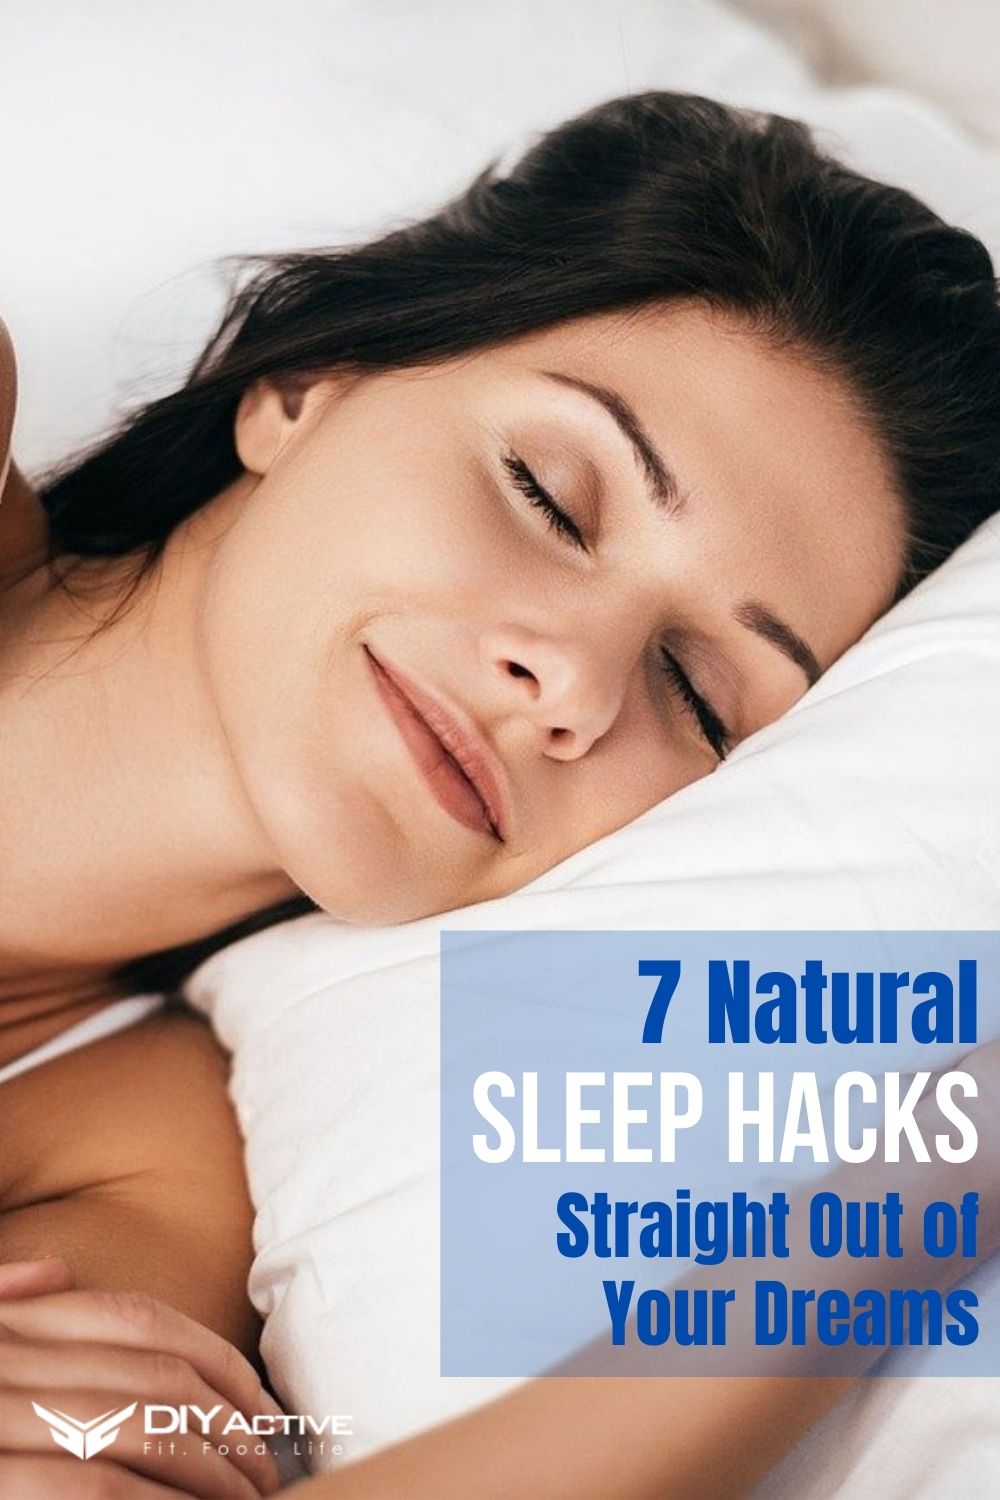 7 Natural Sleep Hacks and Aids Straight Out of Your Dreams